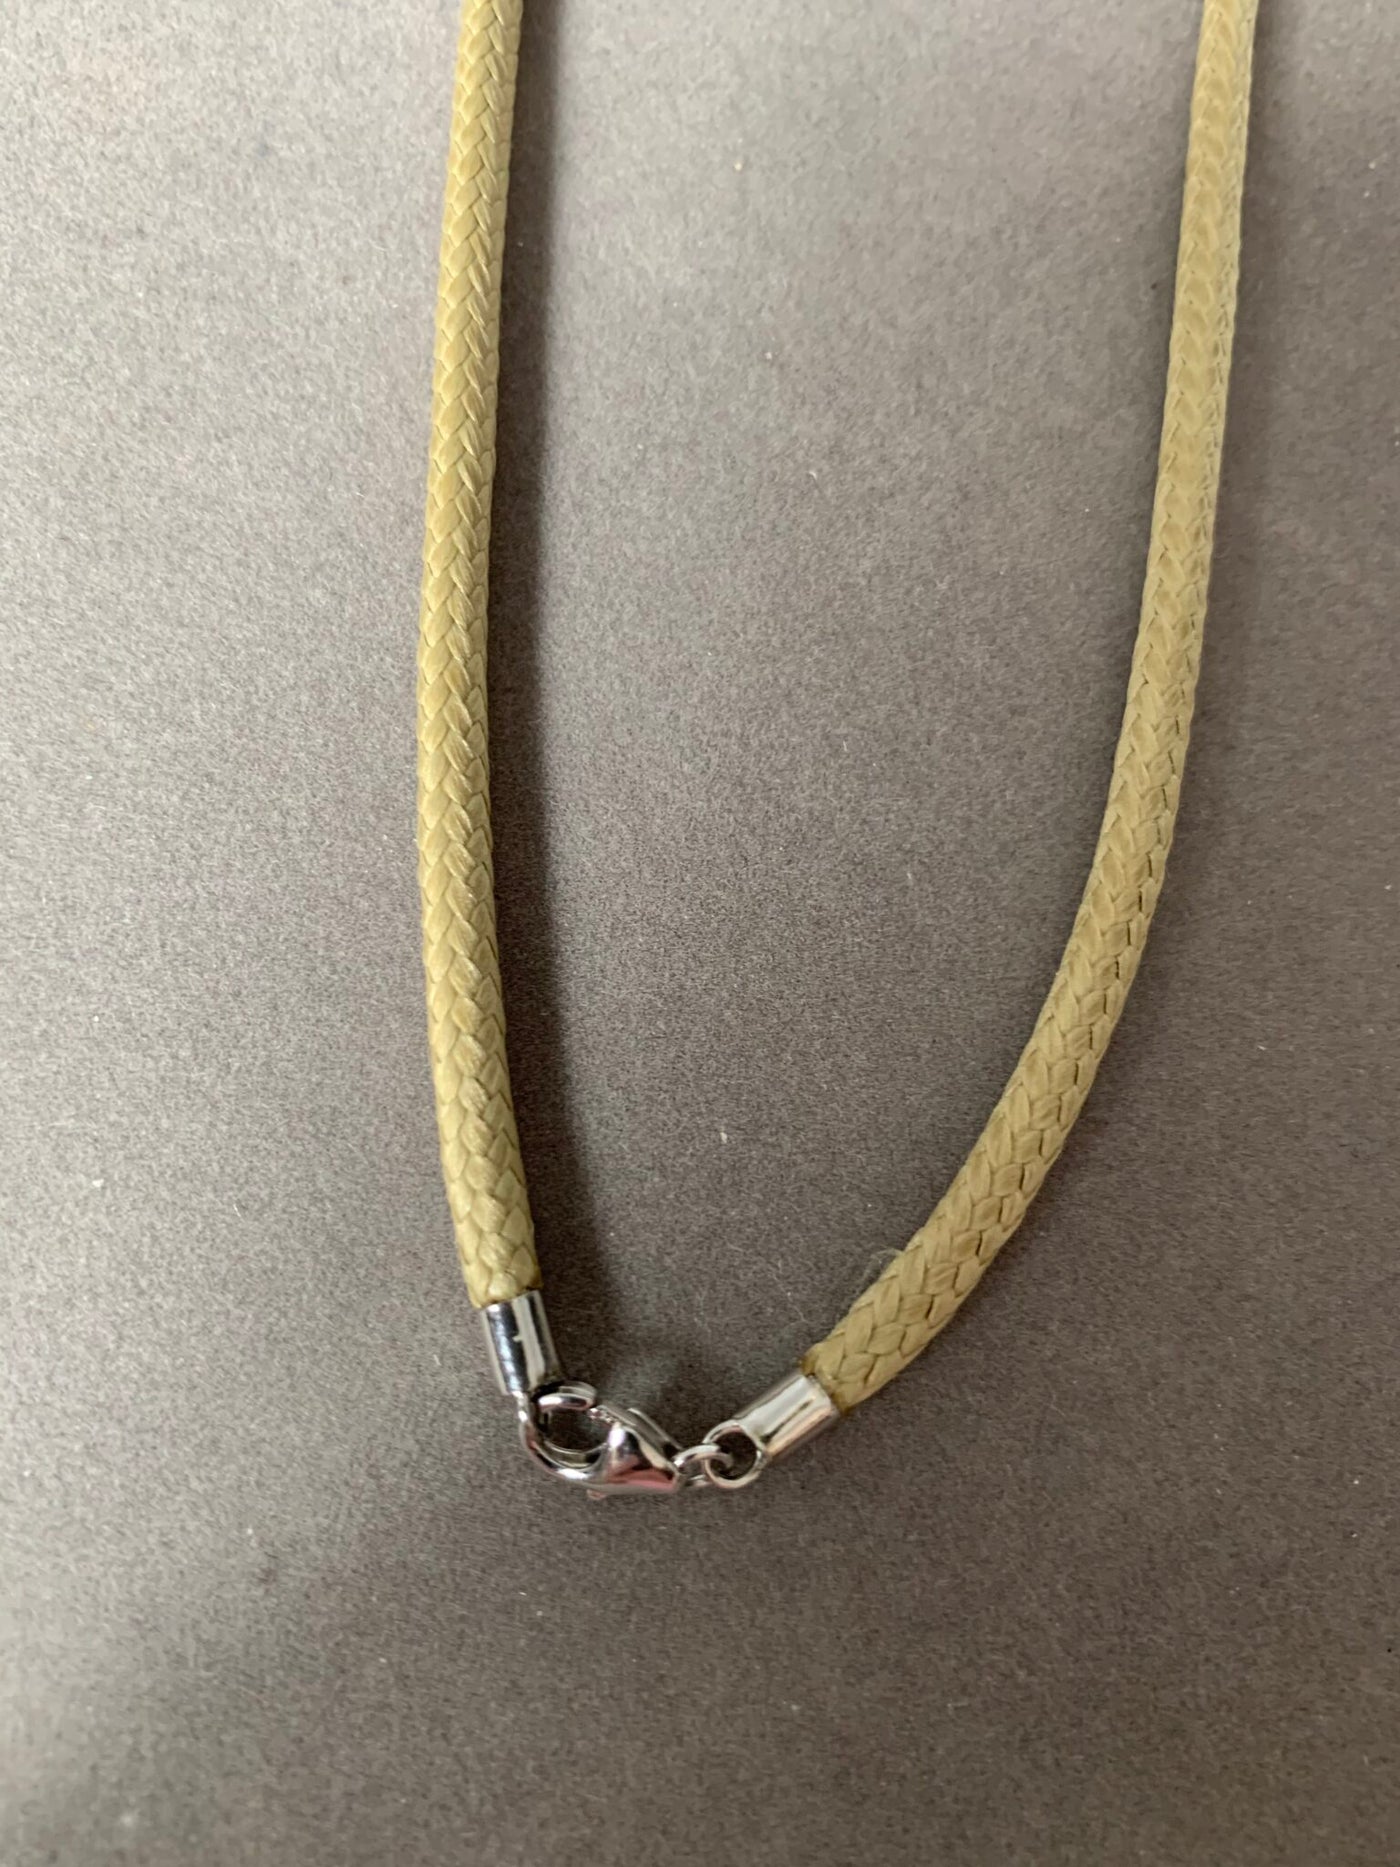 Sterling Silver Closure Cord Necklace in Beige Color